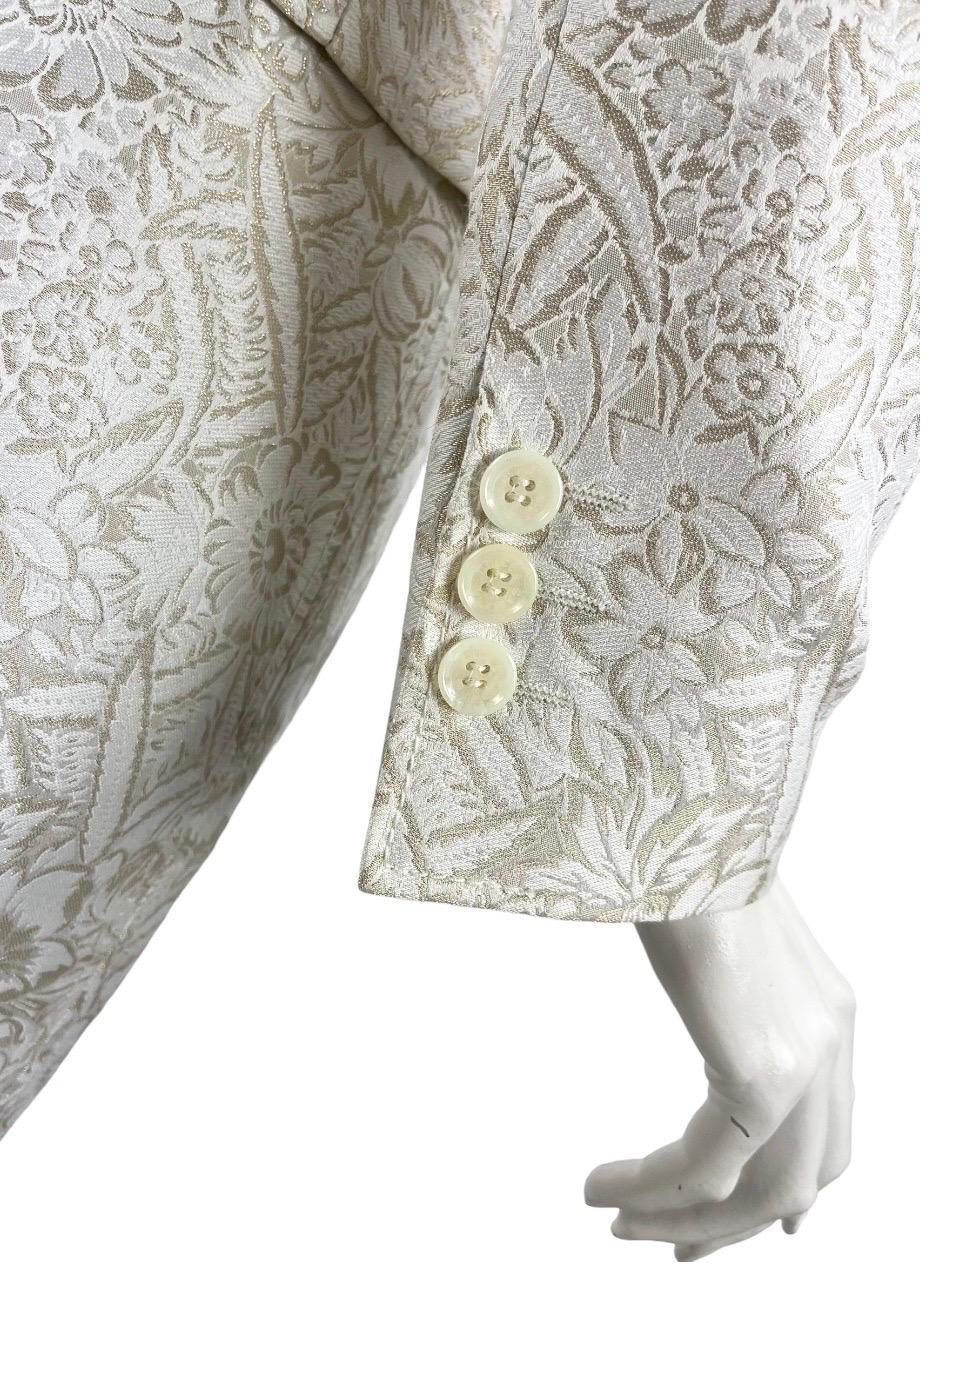 Early 2000-s Vintage Dolce & Gabbana White Gold Floral Jacquard Skirt Suit   For Sale 2